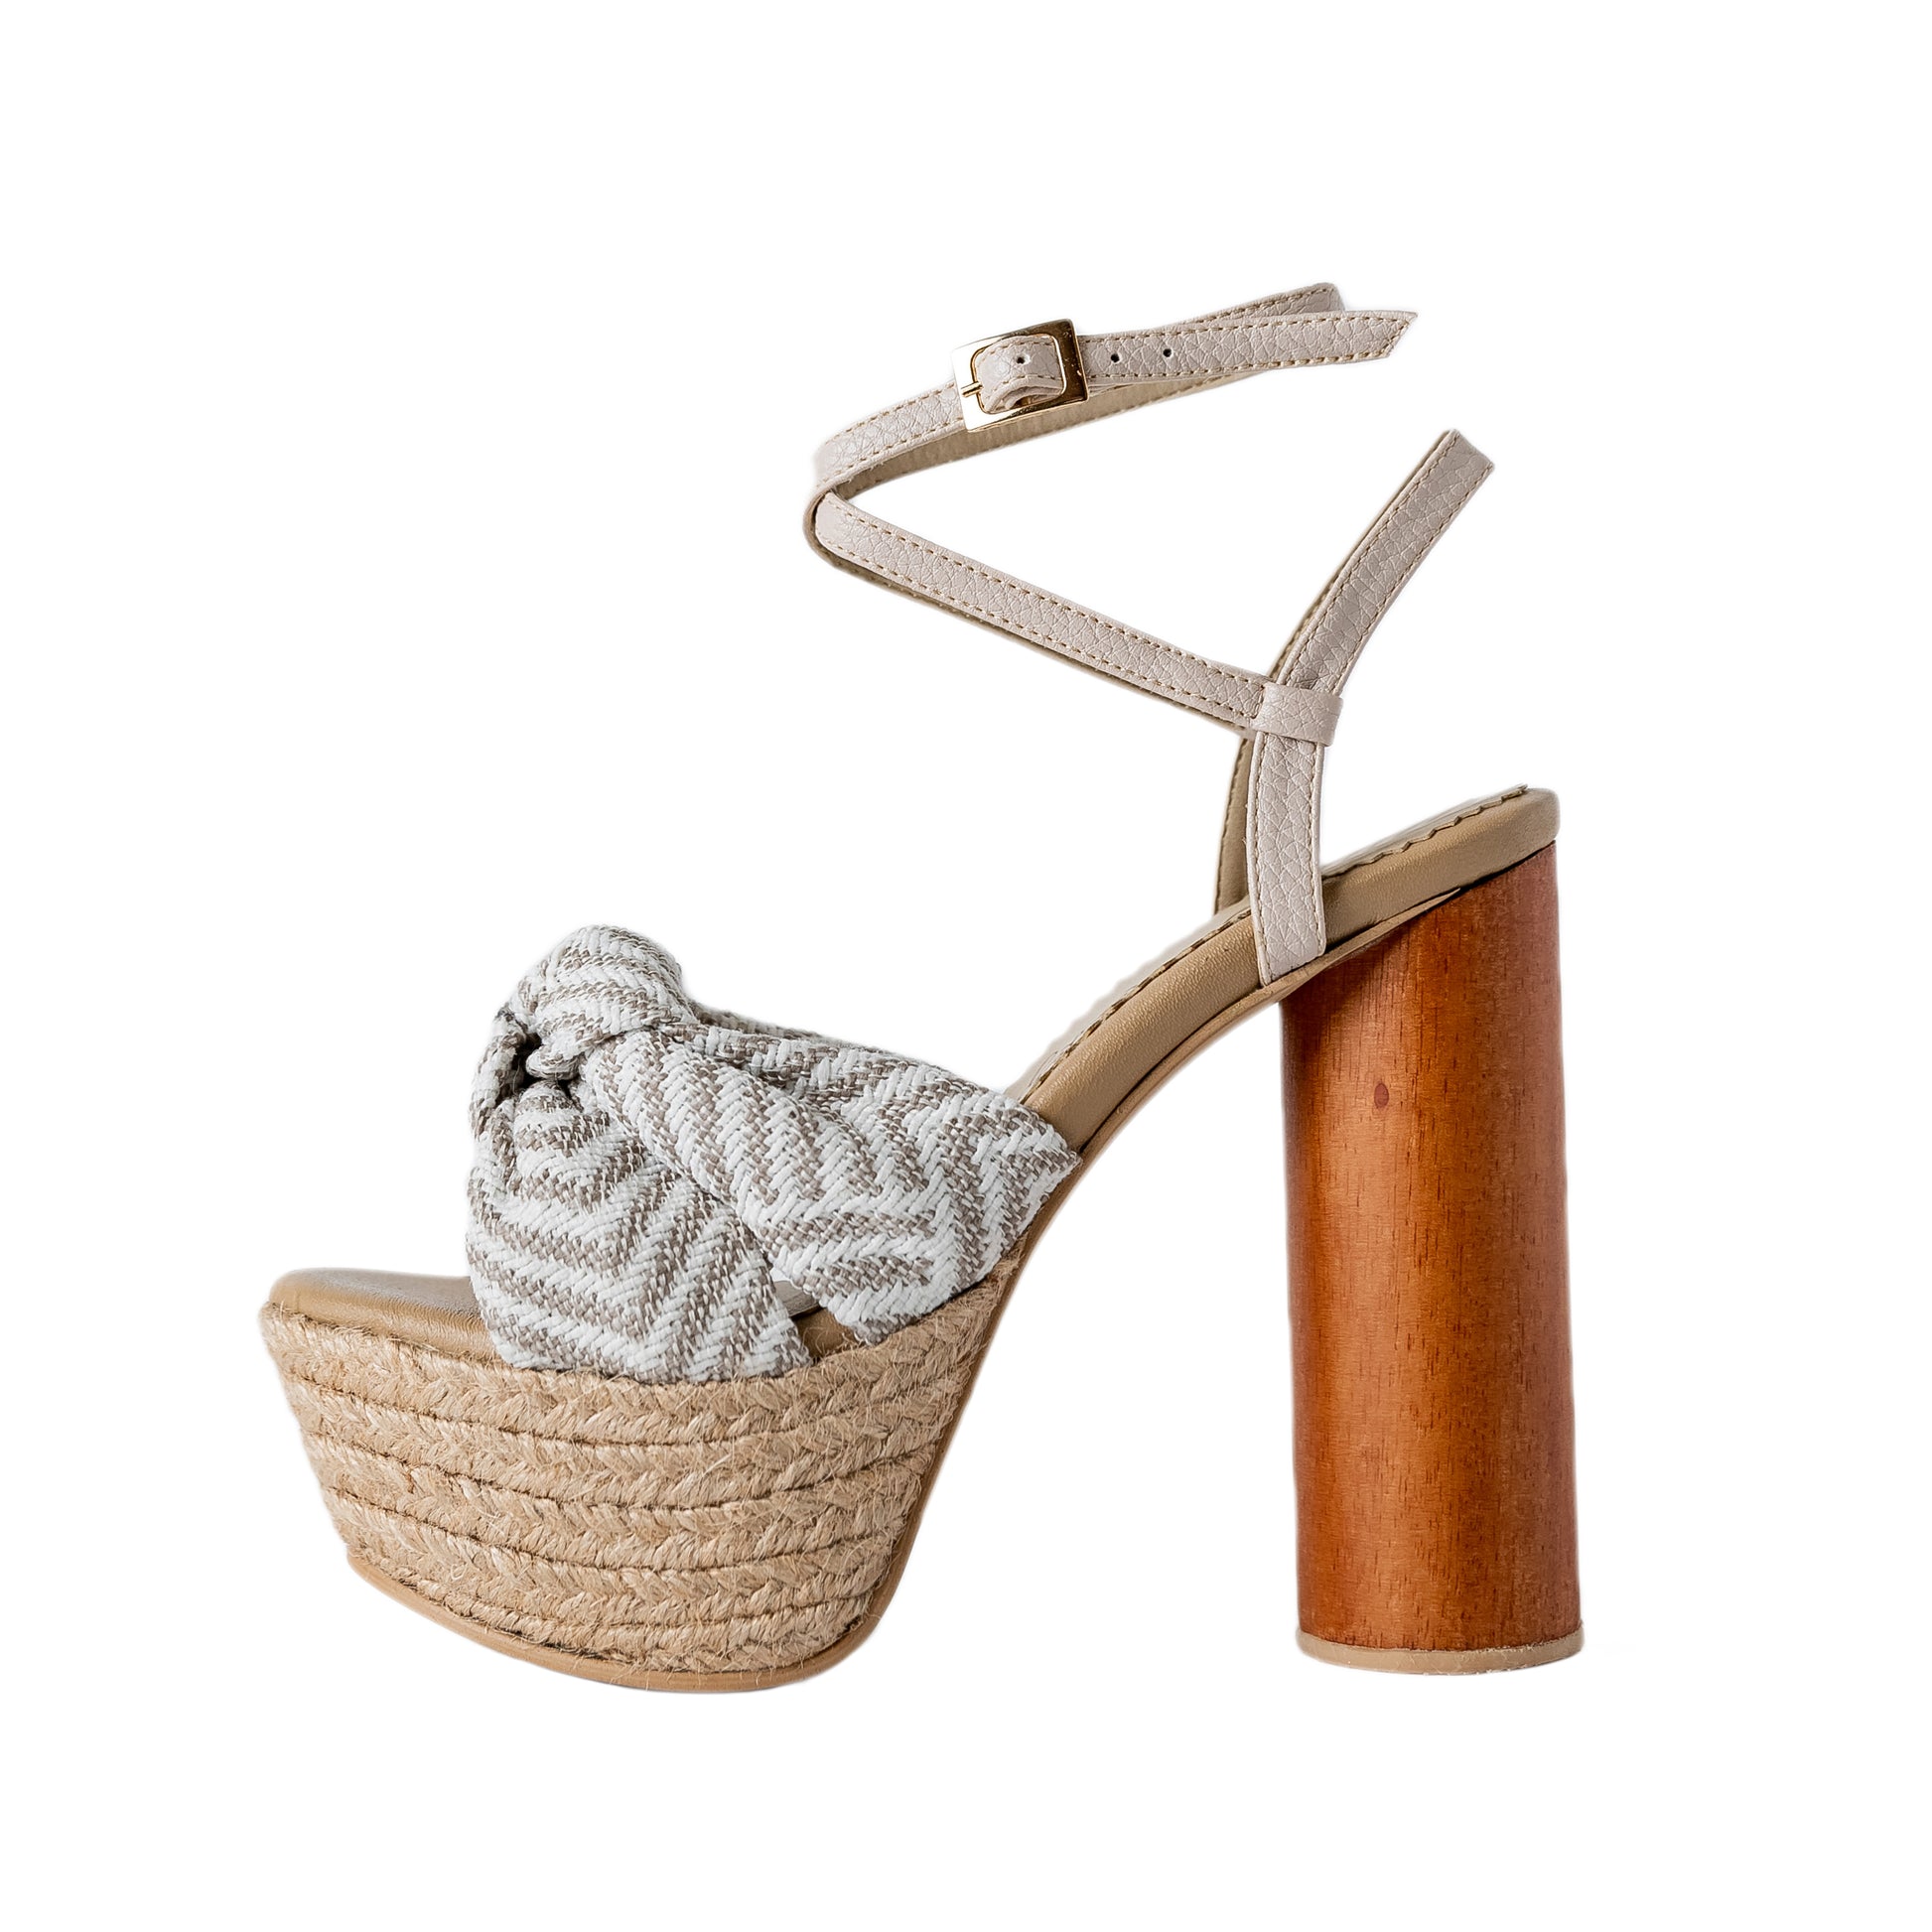 Sandal Lenna Sculptural by Nataly Mendez. Cylindrical wooden heel Platform lined with natural jute Fabric upper Genuine leather back. Handmade 5.25 inch heel height 1.75 inch platform